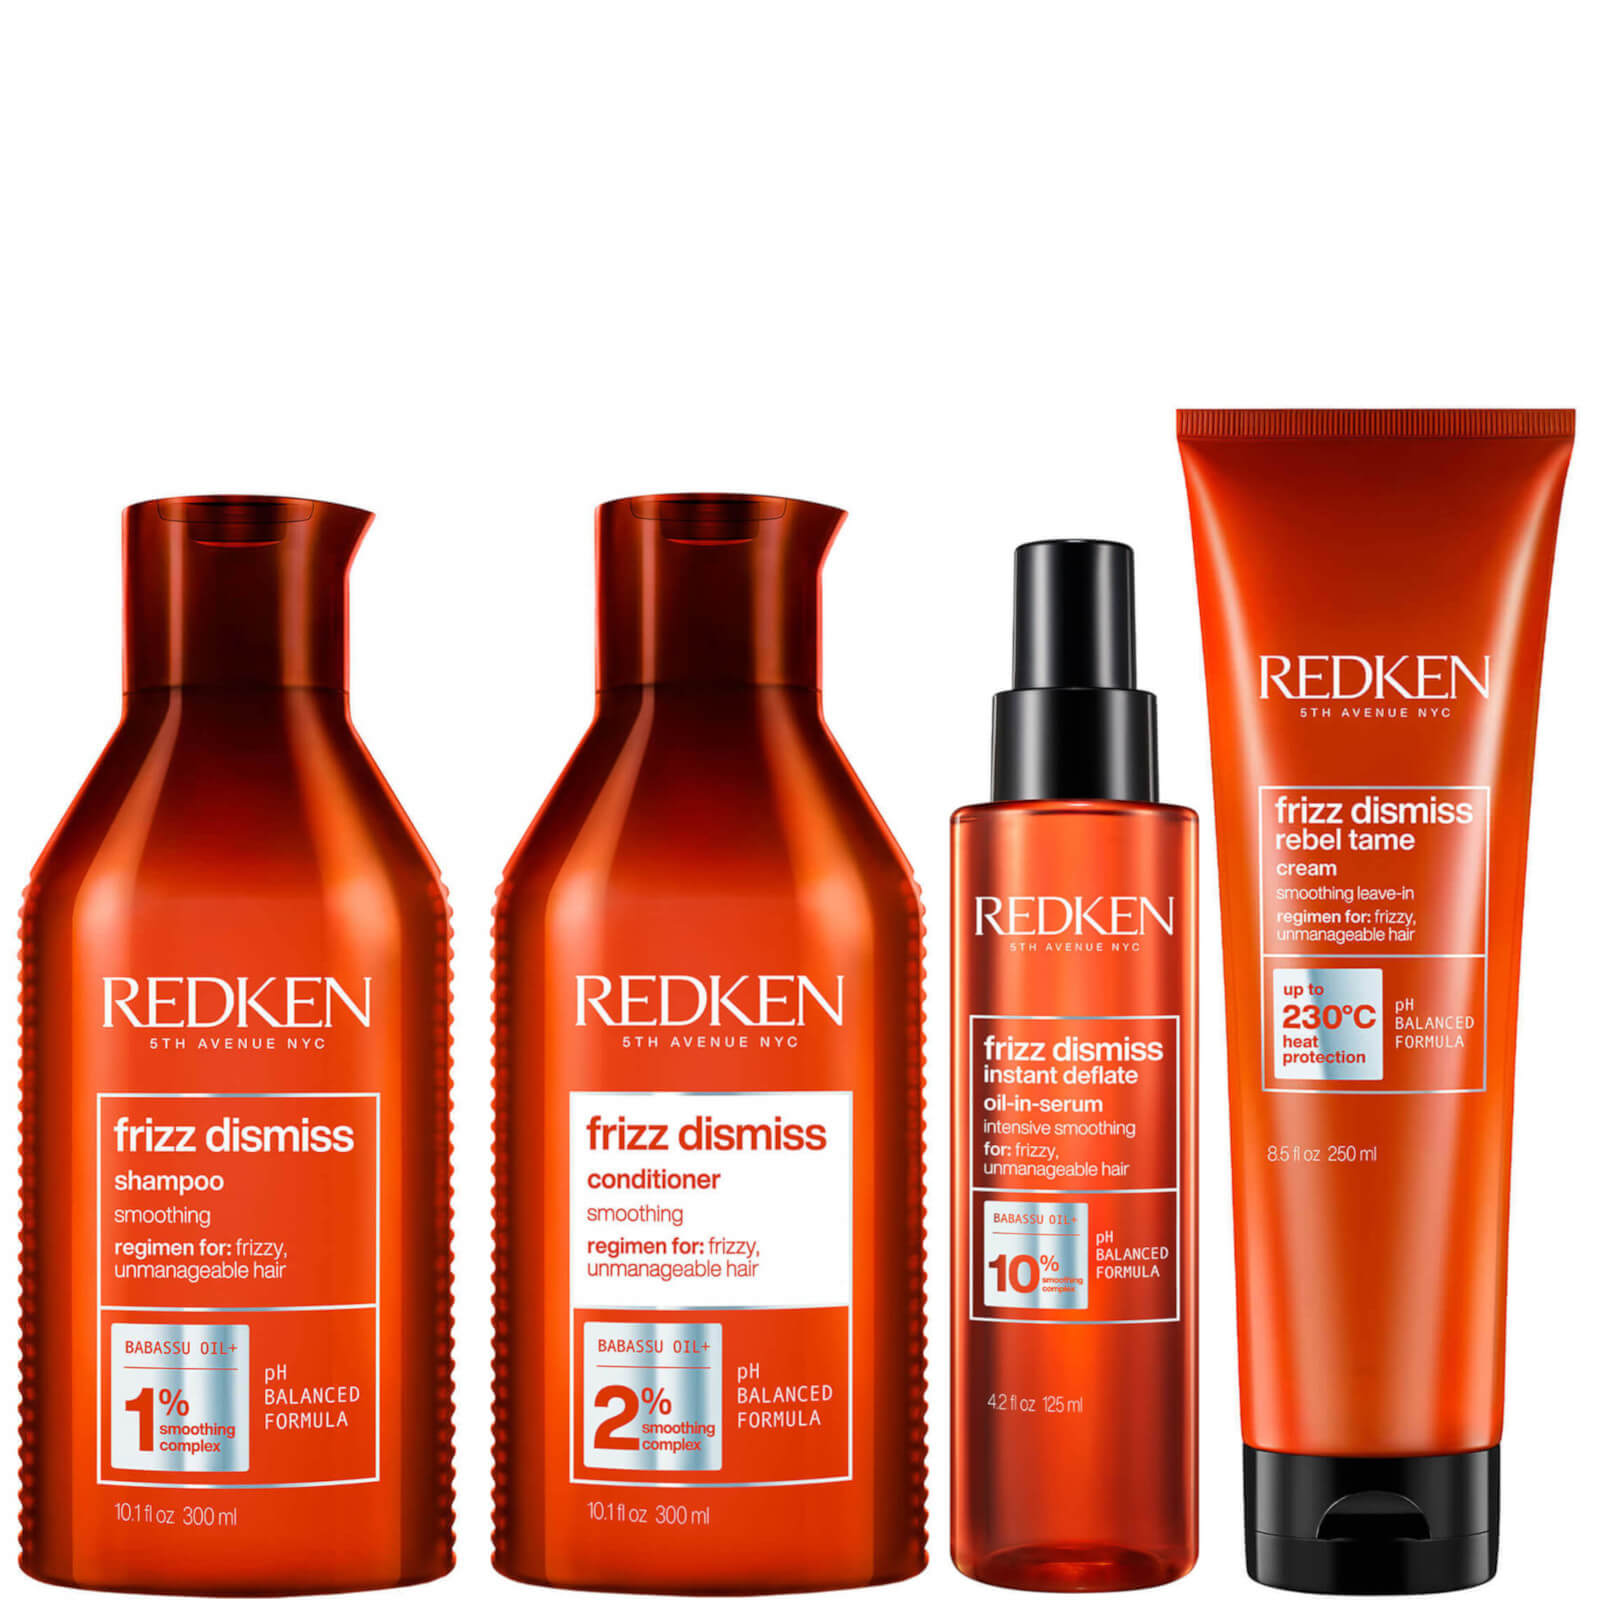 Redken Frizz Dismiss Shampoo, Conditioner, Treatment and Hair Serum Routine for Smoothing Frizzy Hai